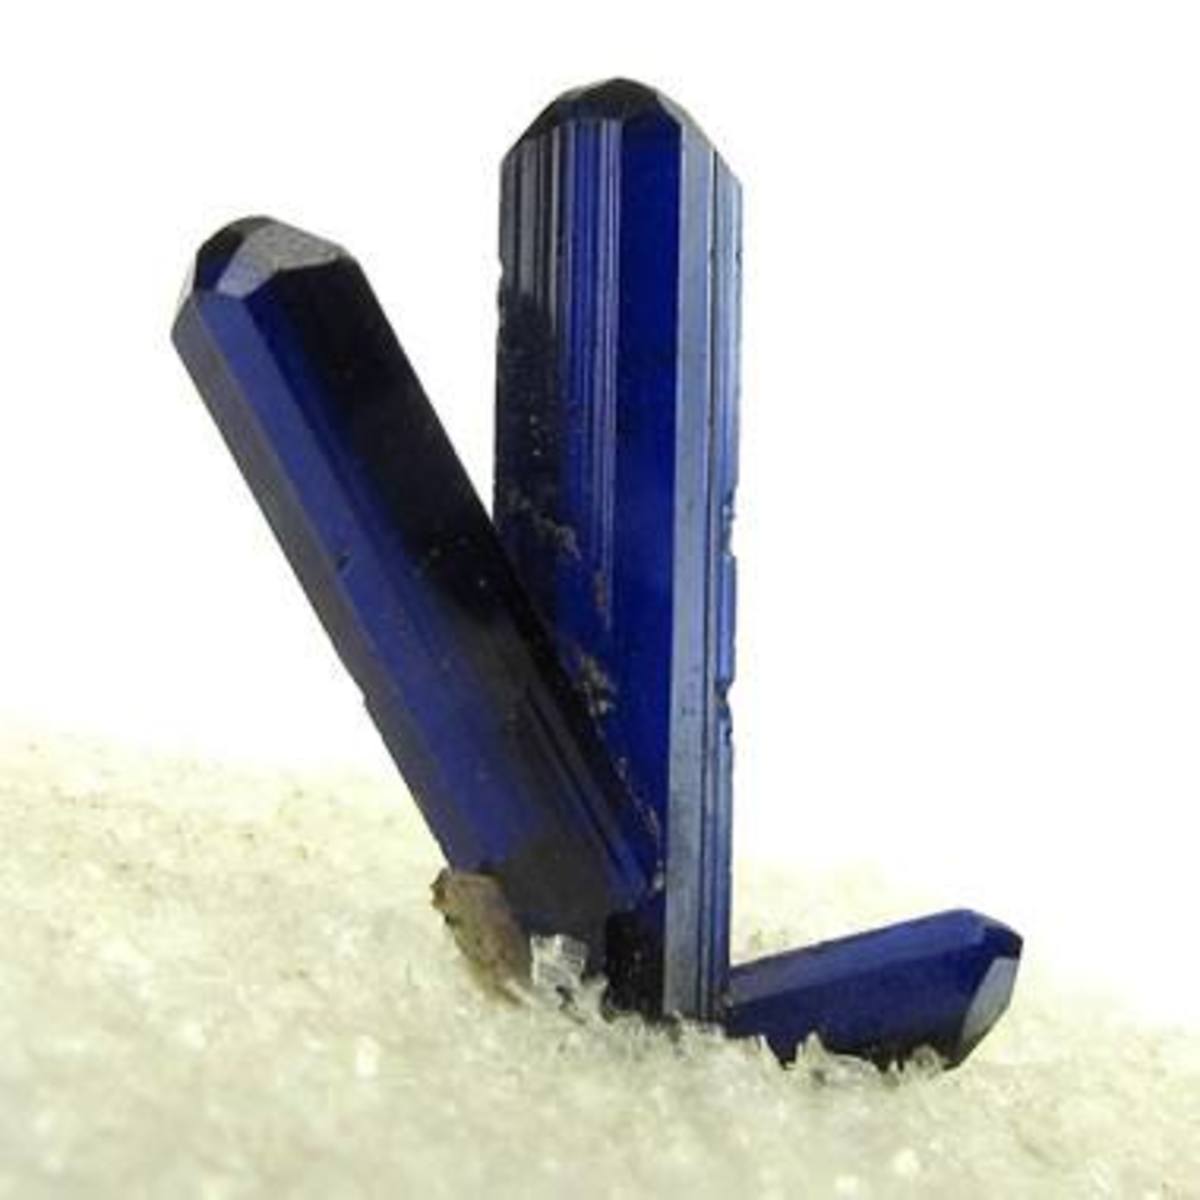 Well-formed azurite crystals